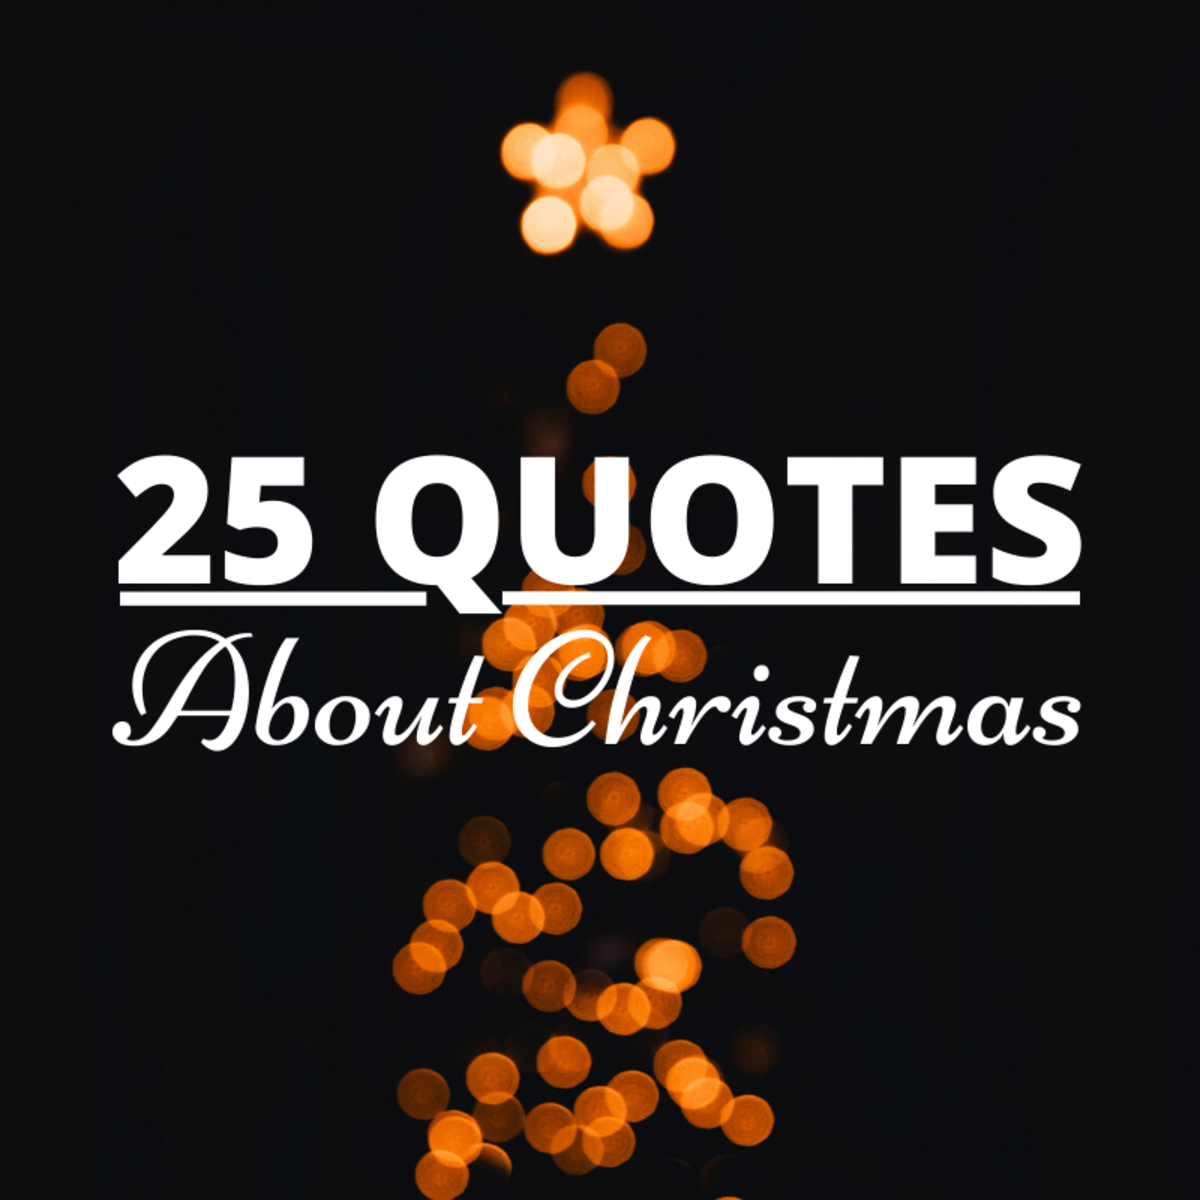 Funny, Sincere, and Unique Quotations About Christmas